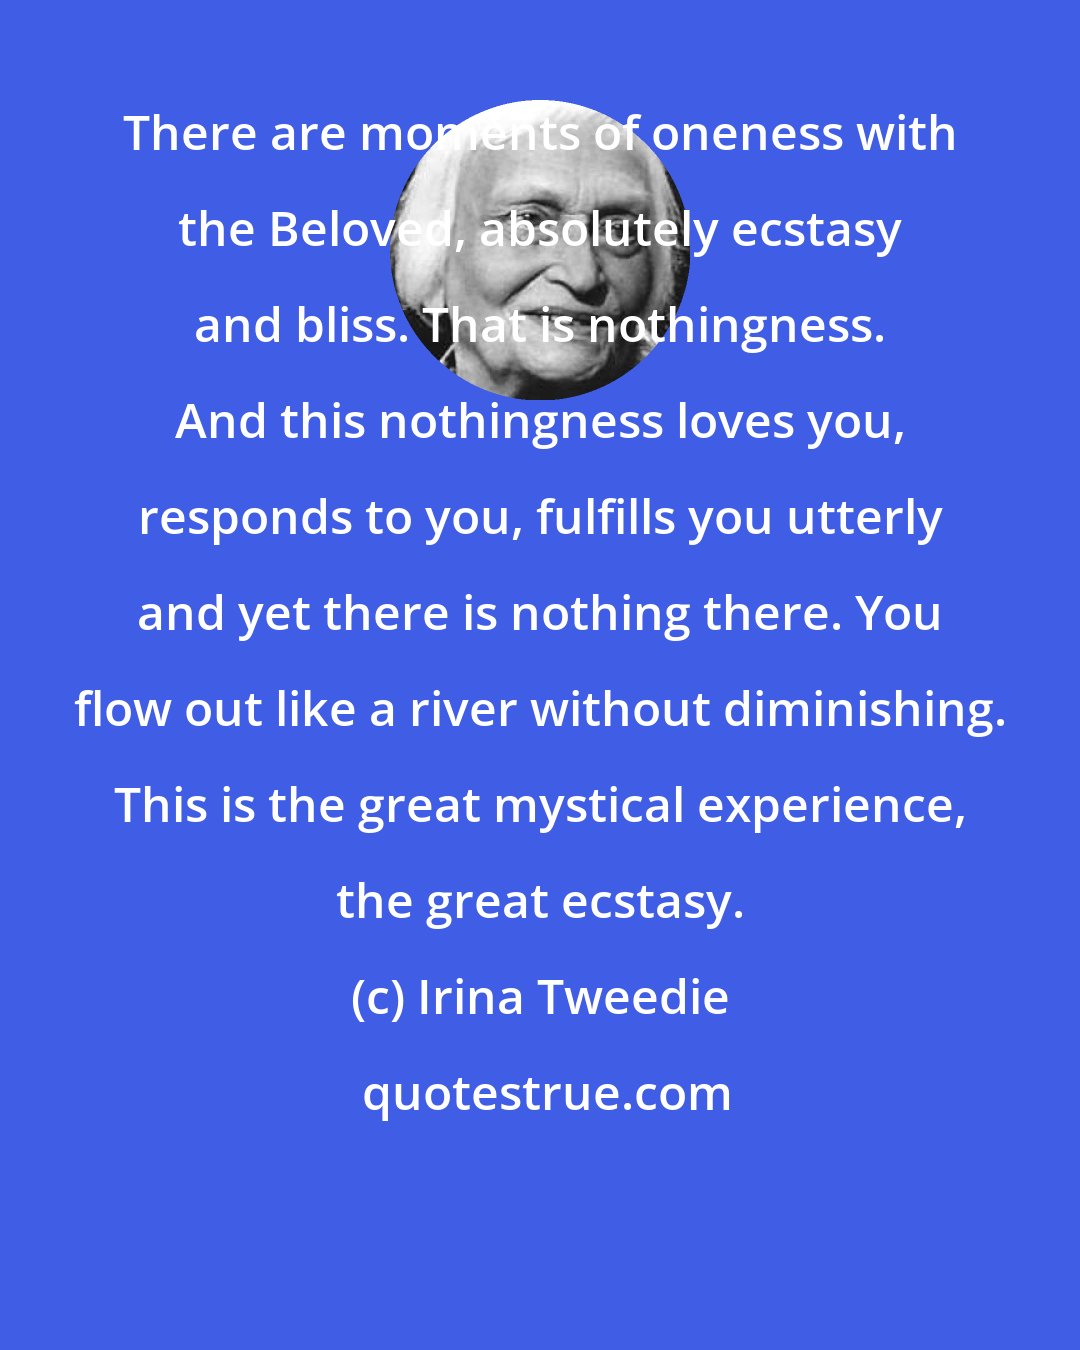 Irina Tweedie: There are moments of oneness with the Beloved, absolutely ecstasy and bliss. That is nothingness. And this nothingness loves you, responds to you, fulfills you utterly and yet there is nothing there. You flow out like a river without diminishing. This is the great mystical experience, the great ecstasy.